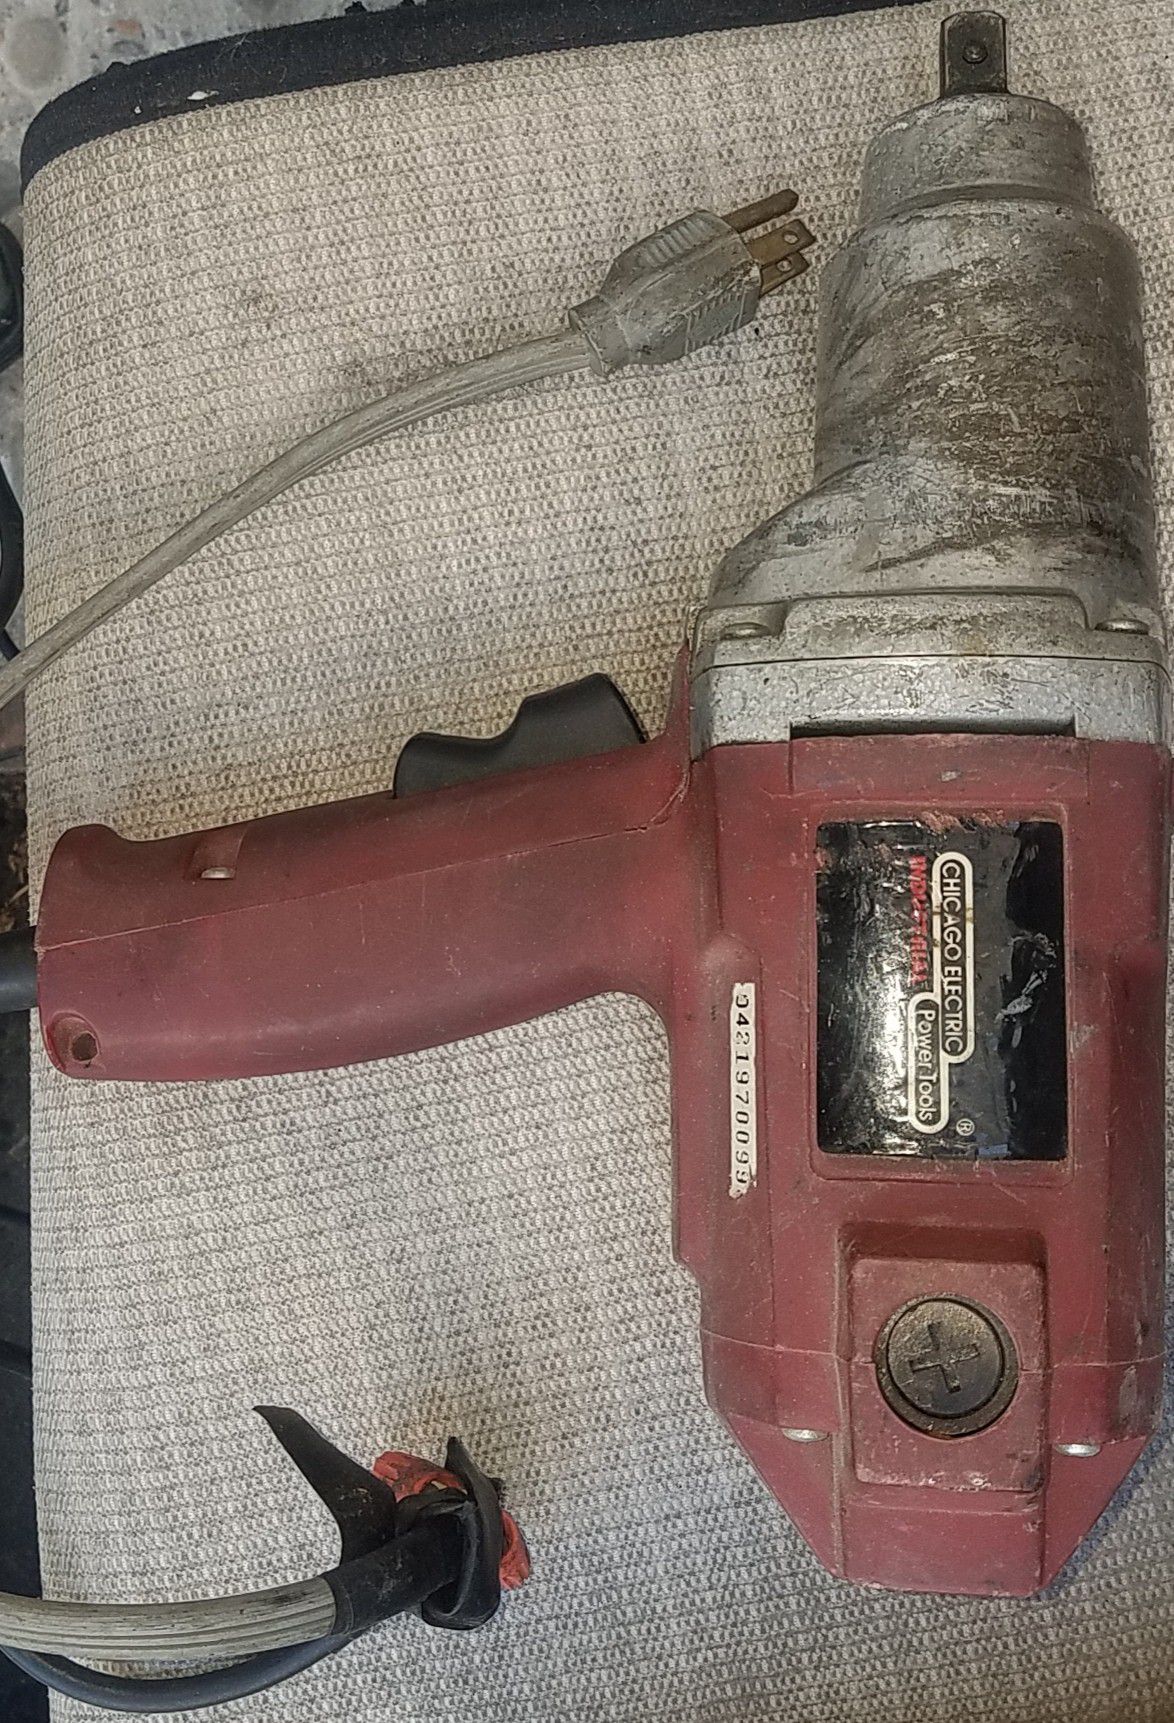 Electrical Power tool